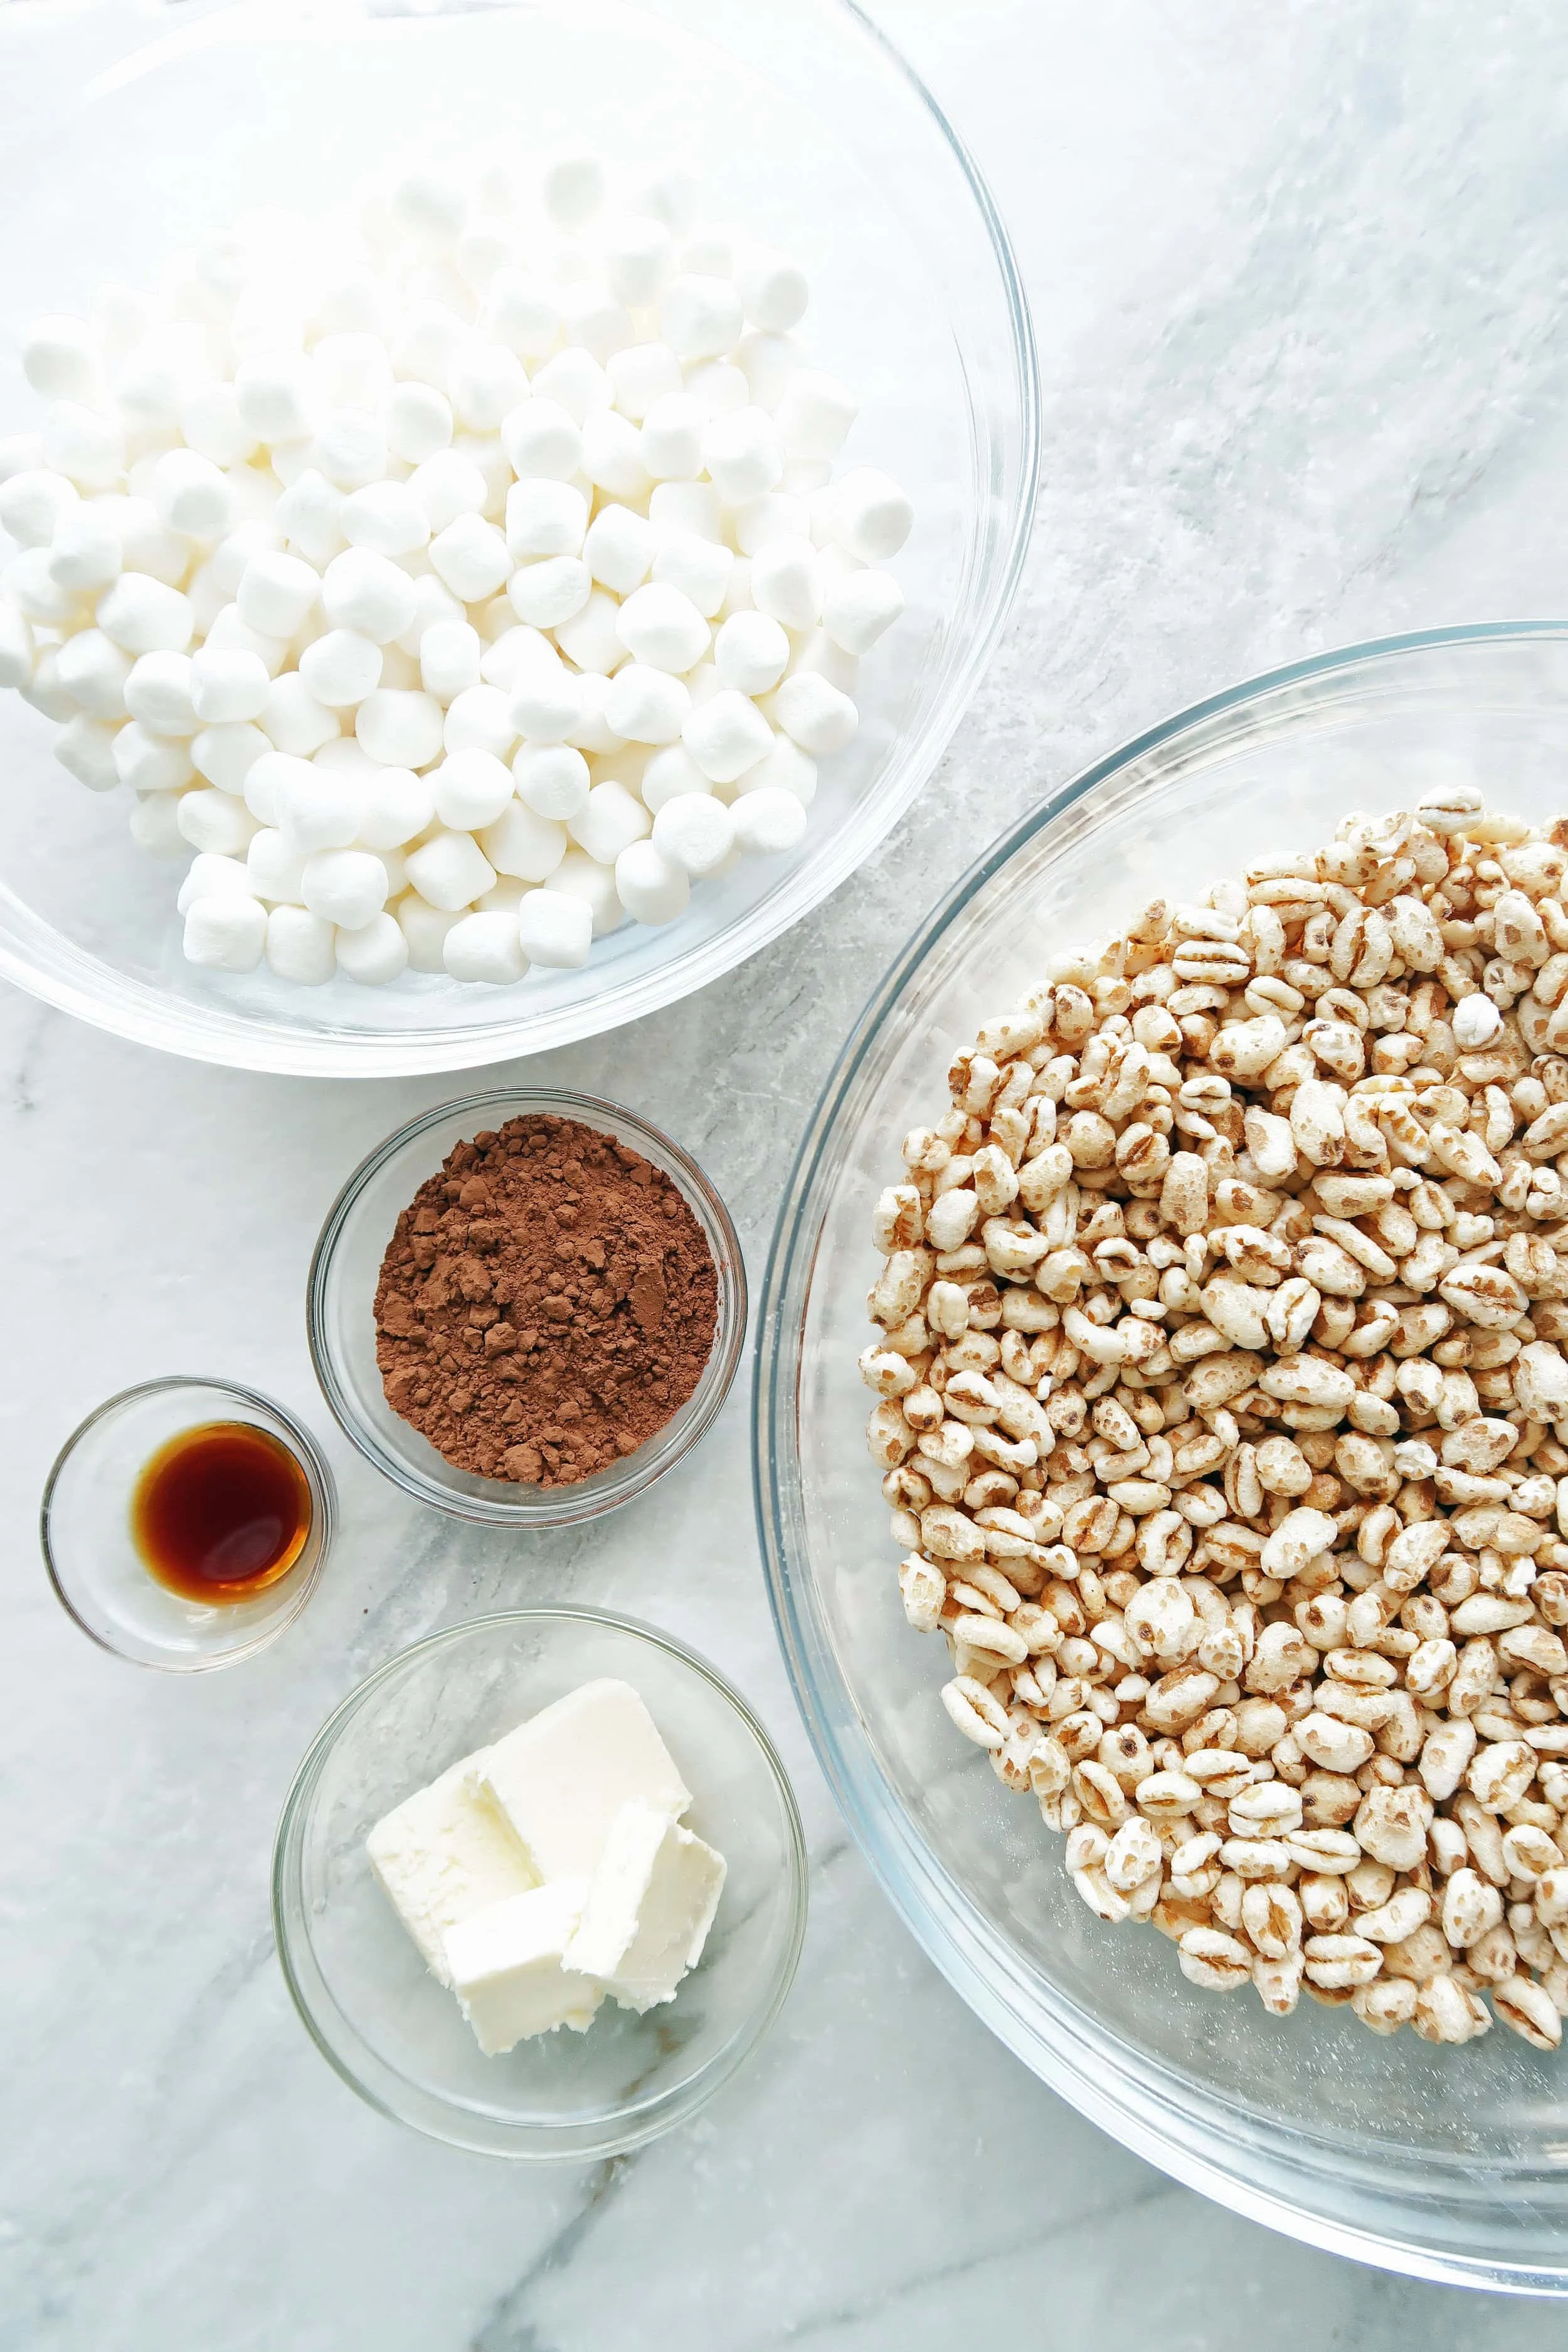 Bowls of puffed wheat, marshmallows, cocoa powder, butter, and vanilla extract.